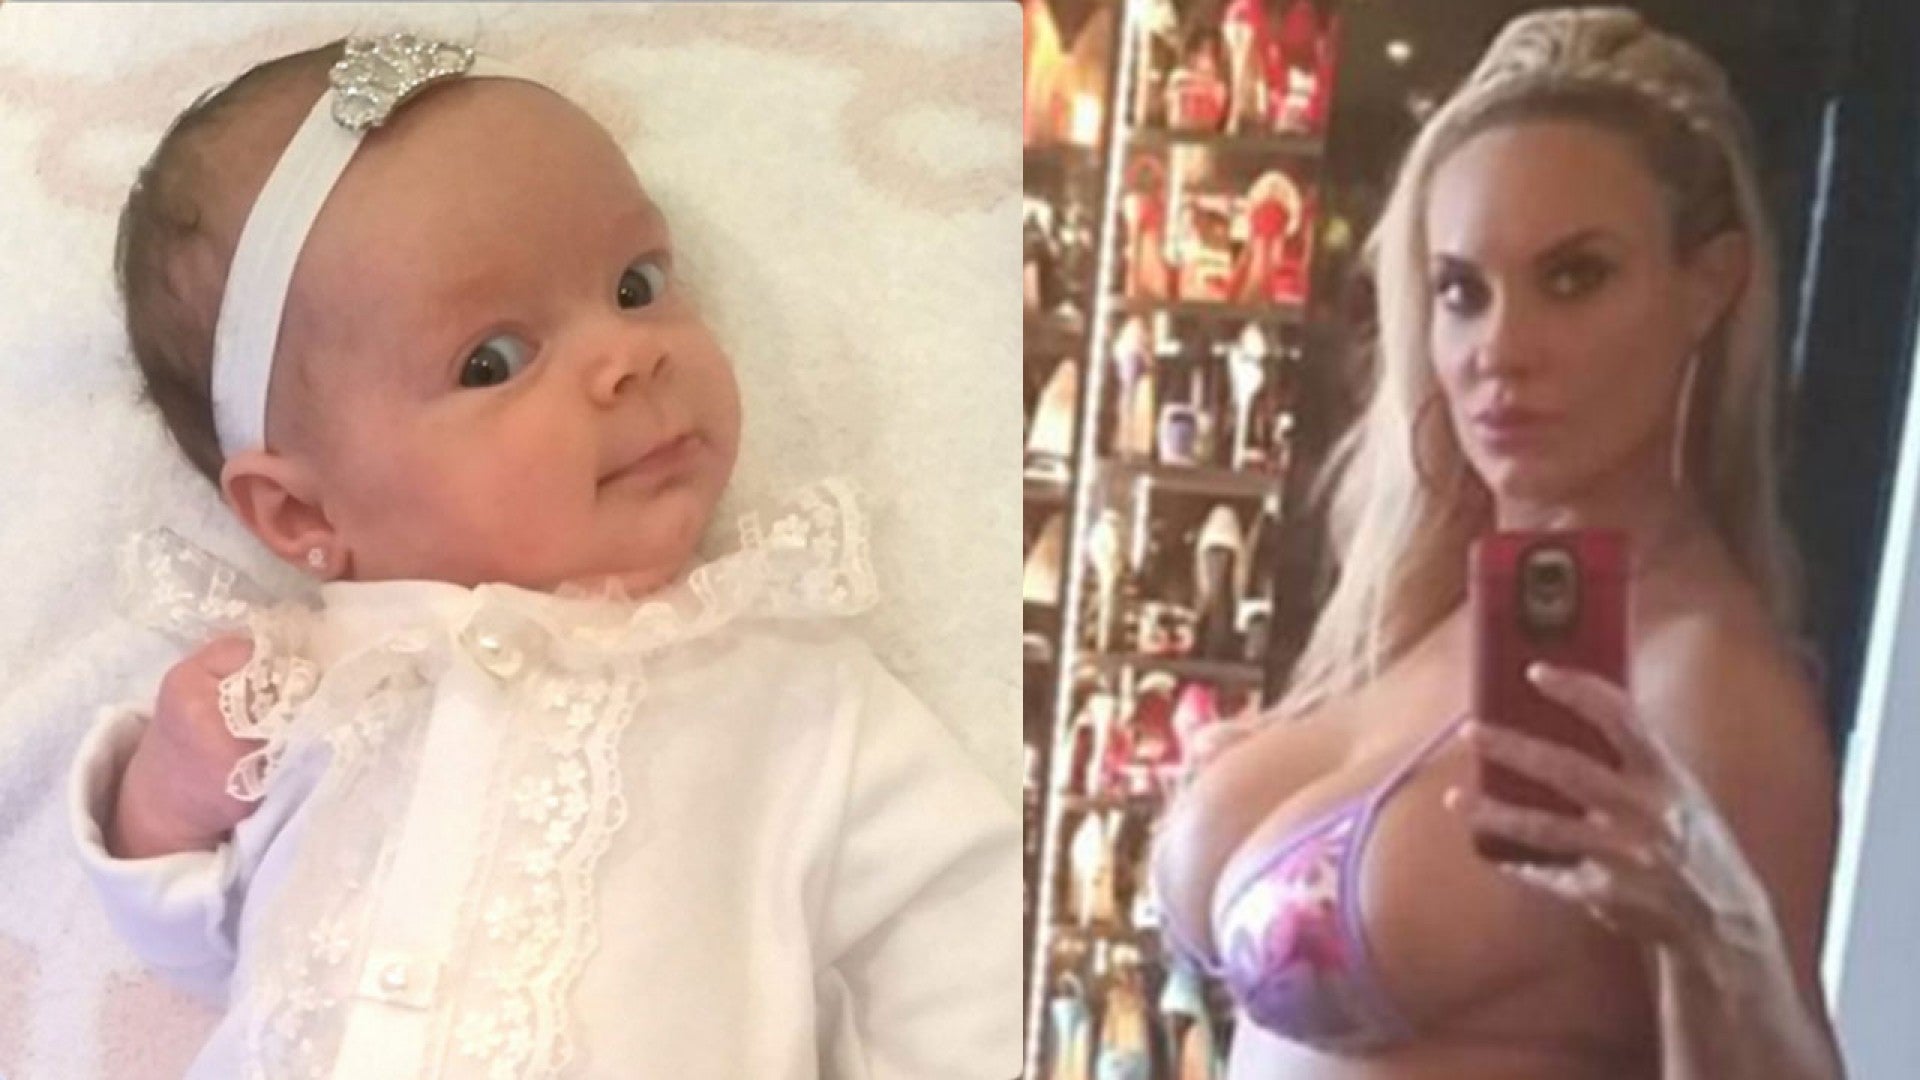 Coco Austin and Ice-T's Daughter Chanel Has Pierced Ears!